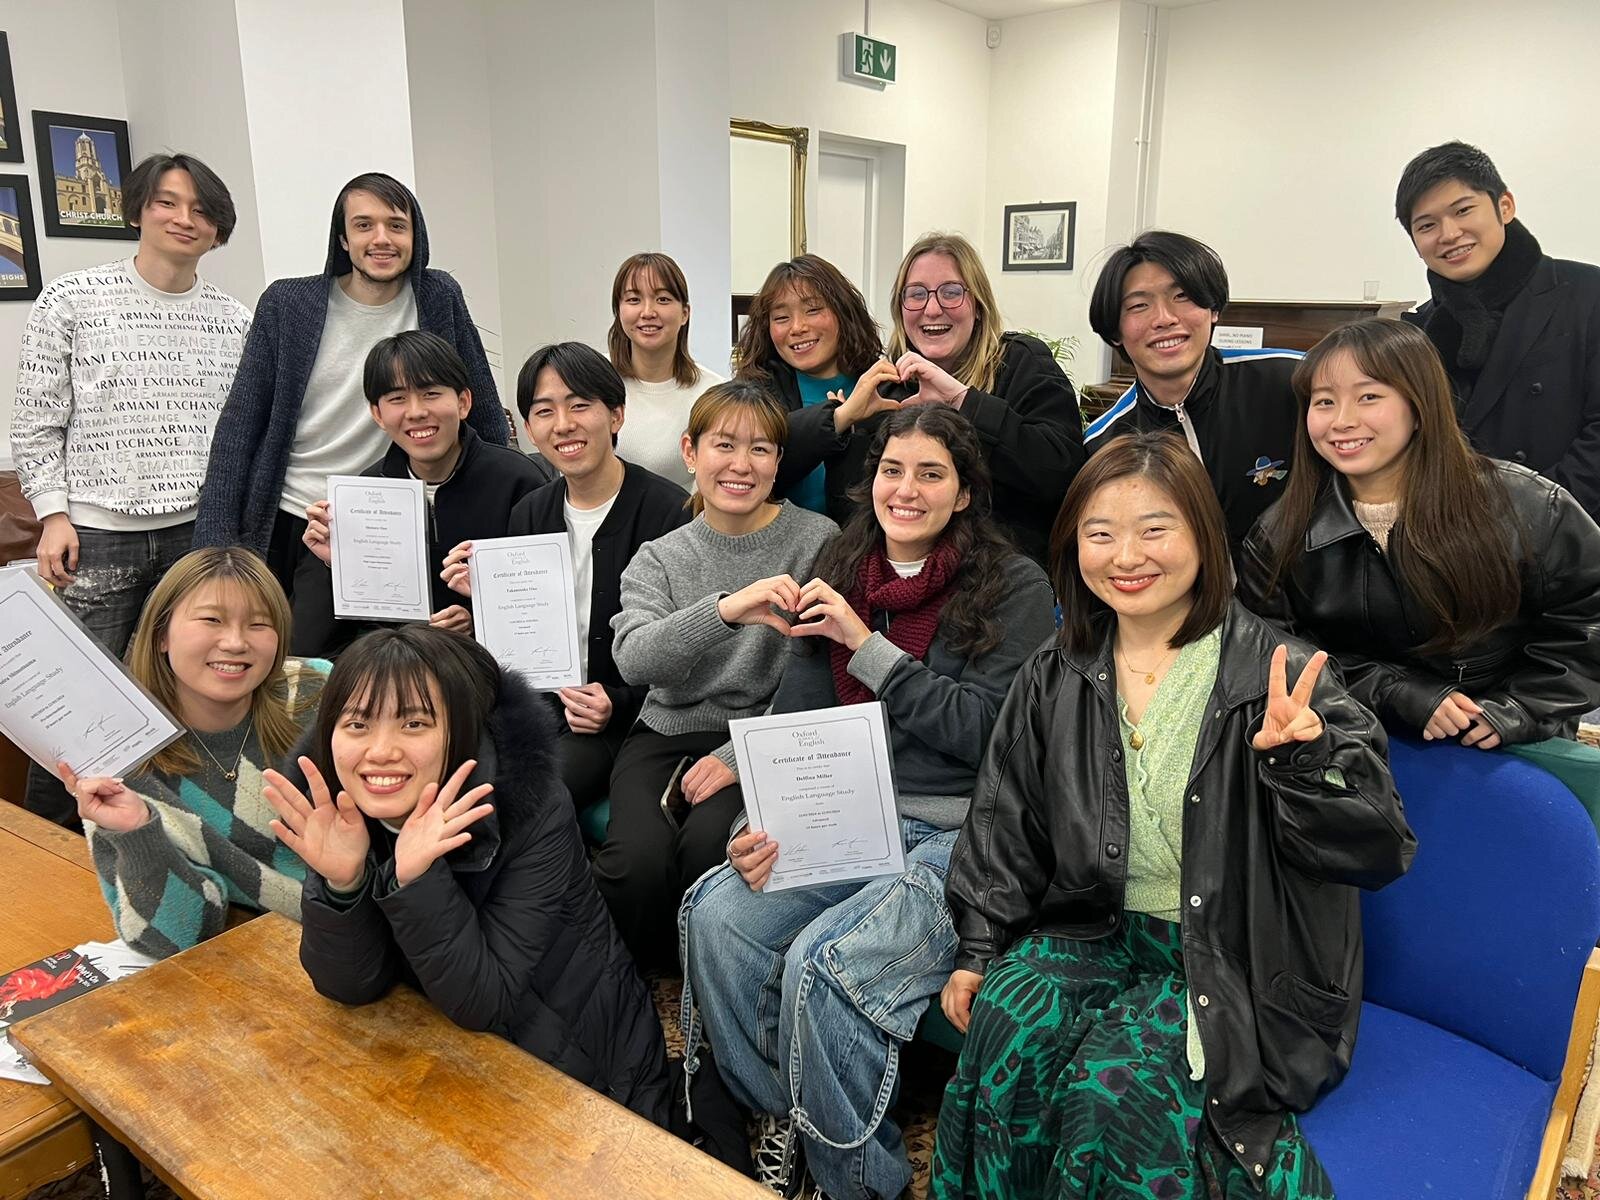 Friday leavers!😢

We had a few students leave today. We hope everyone had a great stay, whether it was long or short - we wish you all the best.🥰✨

 #englishlanguage #studyintheuk #studywithus #internationalstudent #friends #englishoxford #internat